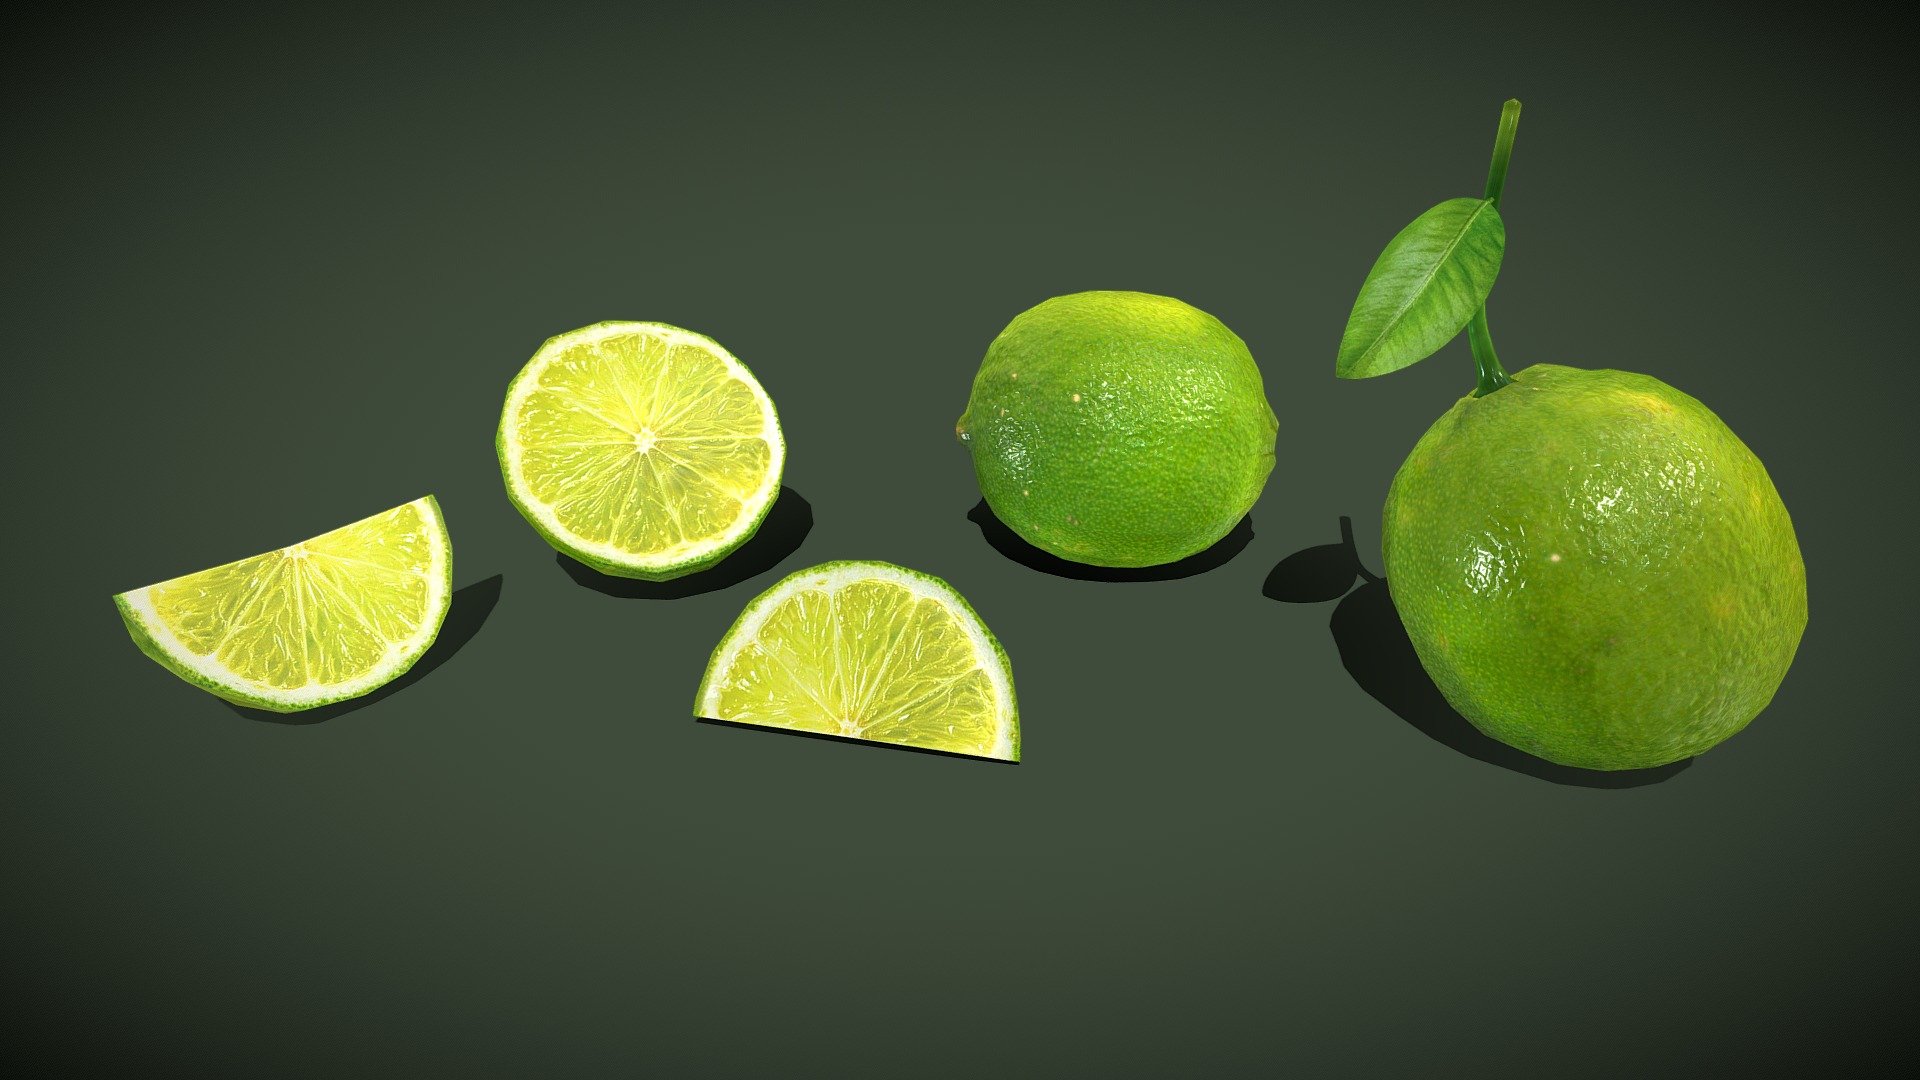 Lemon Fruit Sliced With Leaf
This Lime pack 3D model was created with real referance. It’s created accurately and qualitatively, in real units of measurement. 

Texture Pack: 2k Jpeg files.

This Pack contains: 
-&gt; 1 full lime model with leaf,
-&gt; 1 full lime model without leaf,
-&gt; 1 half slice, 
-&gt; 2 quarter slices.
This Lemon or Lime fruit and slice for all of your needs.

lemon
slice
fruit
juice
food
and
sliced
half
cut
photorealistic
scan
scanned
drink
realism
realistic
lime
quater
full - Lemon Fruit Sliced With Leaf - Buy Royalty Free 3D model by srikanthsamba 3d model